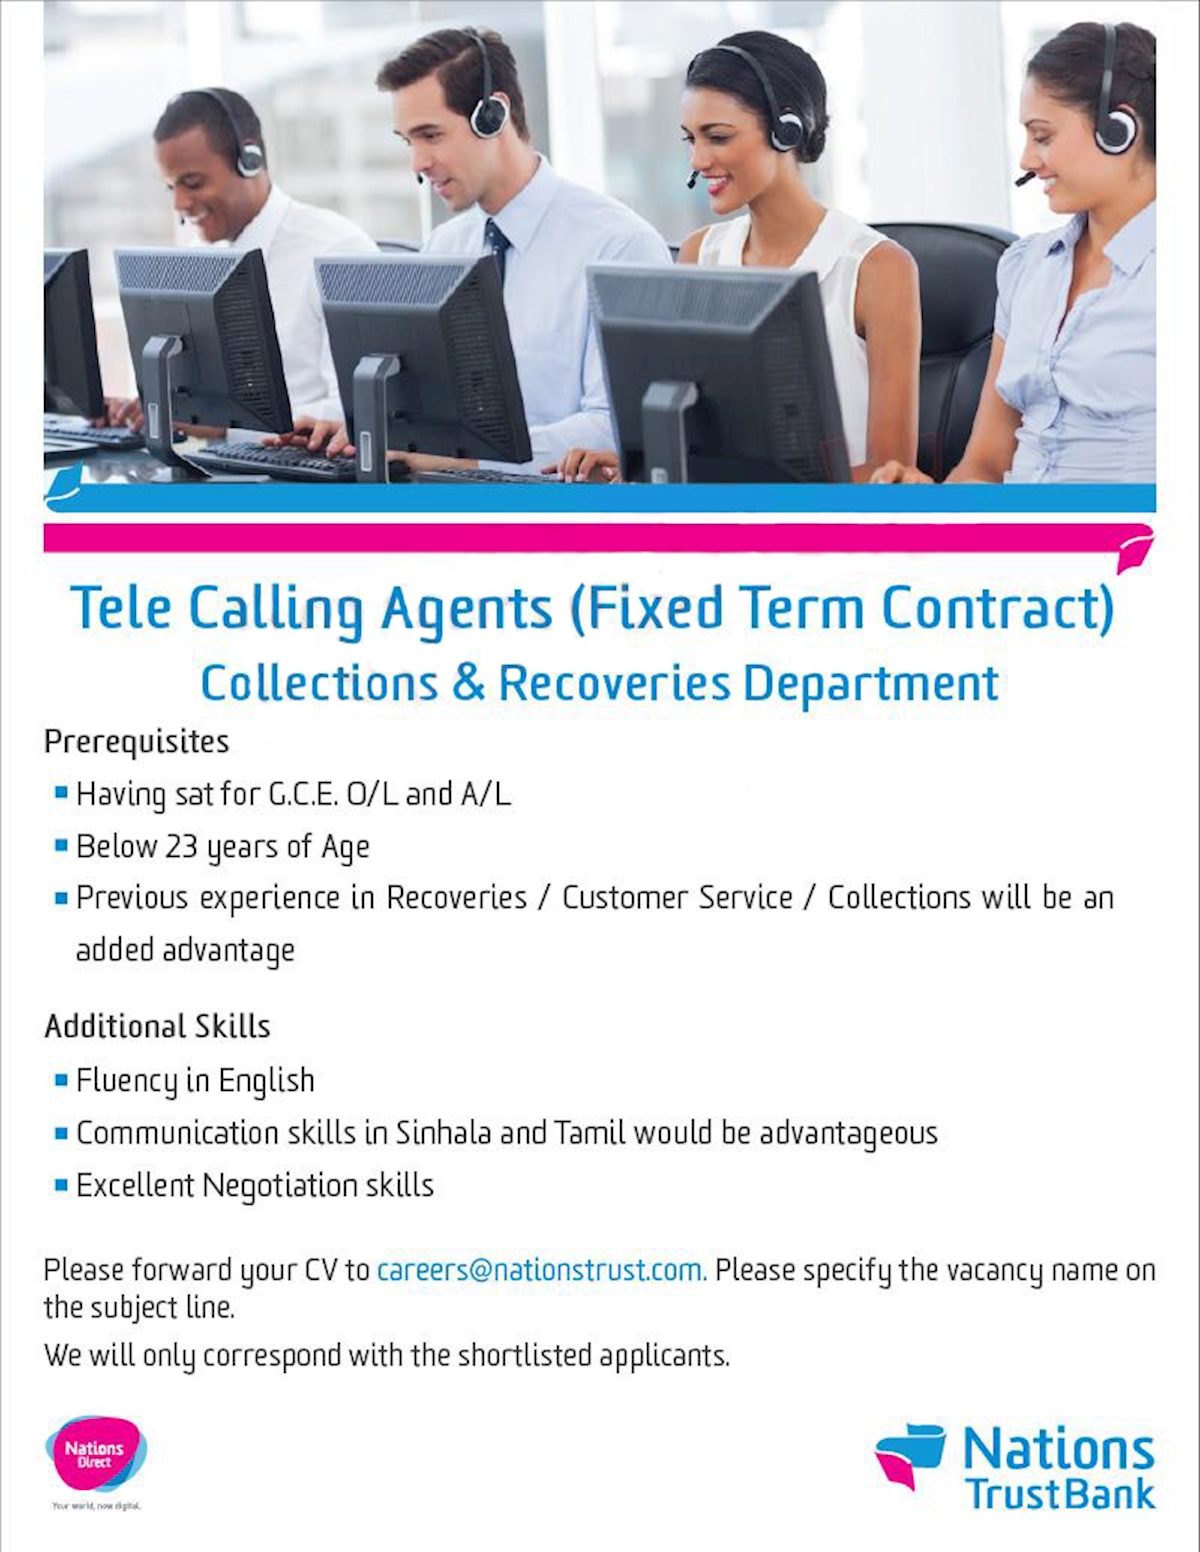 Telecalling Agents (Fixed Term Contract) - Collections and Recoveries Department